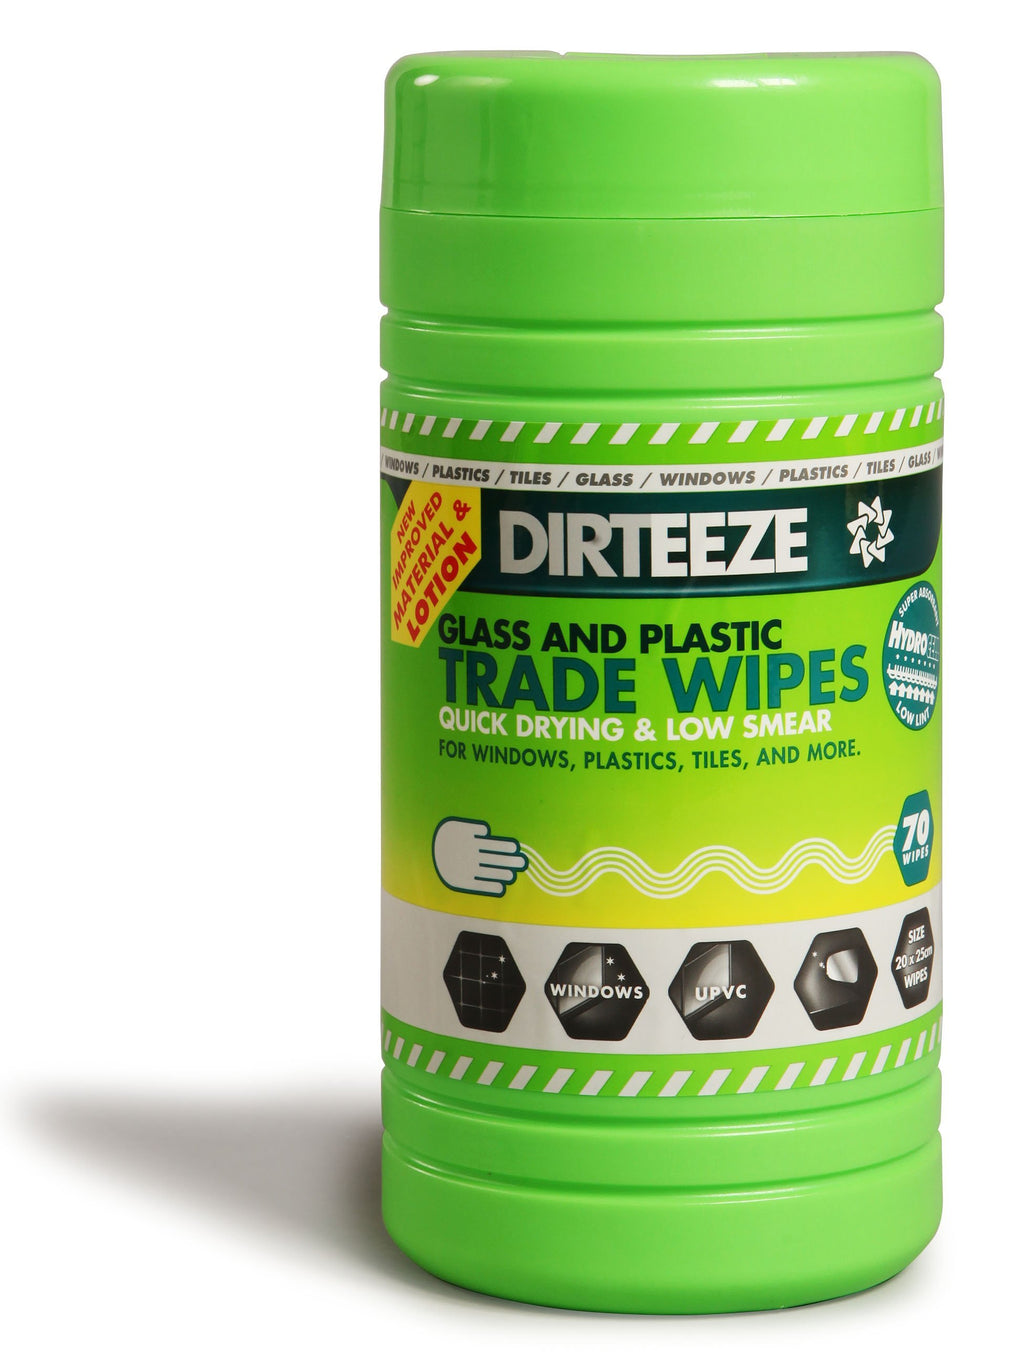 Dirteeze Glass and Plastic Trade Wipes - GDCL80 ||8 Tubs of 80 Wipes